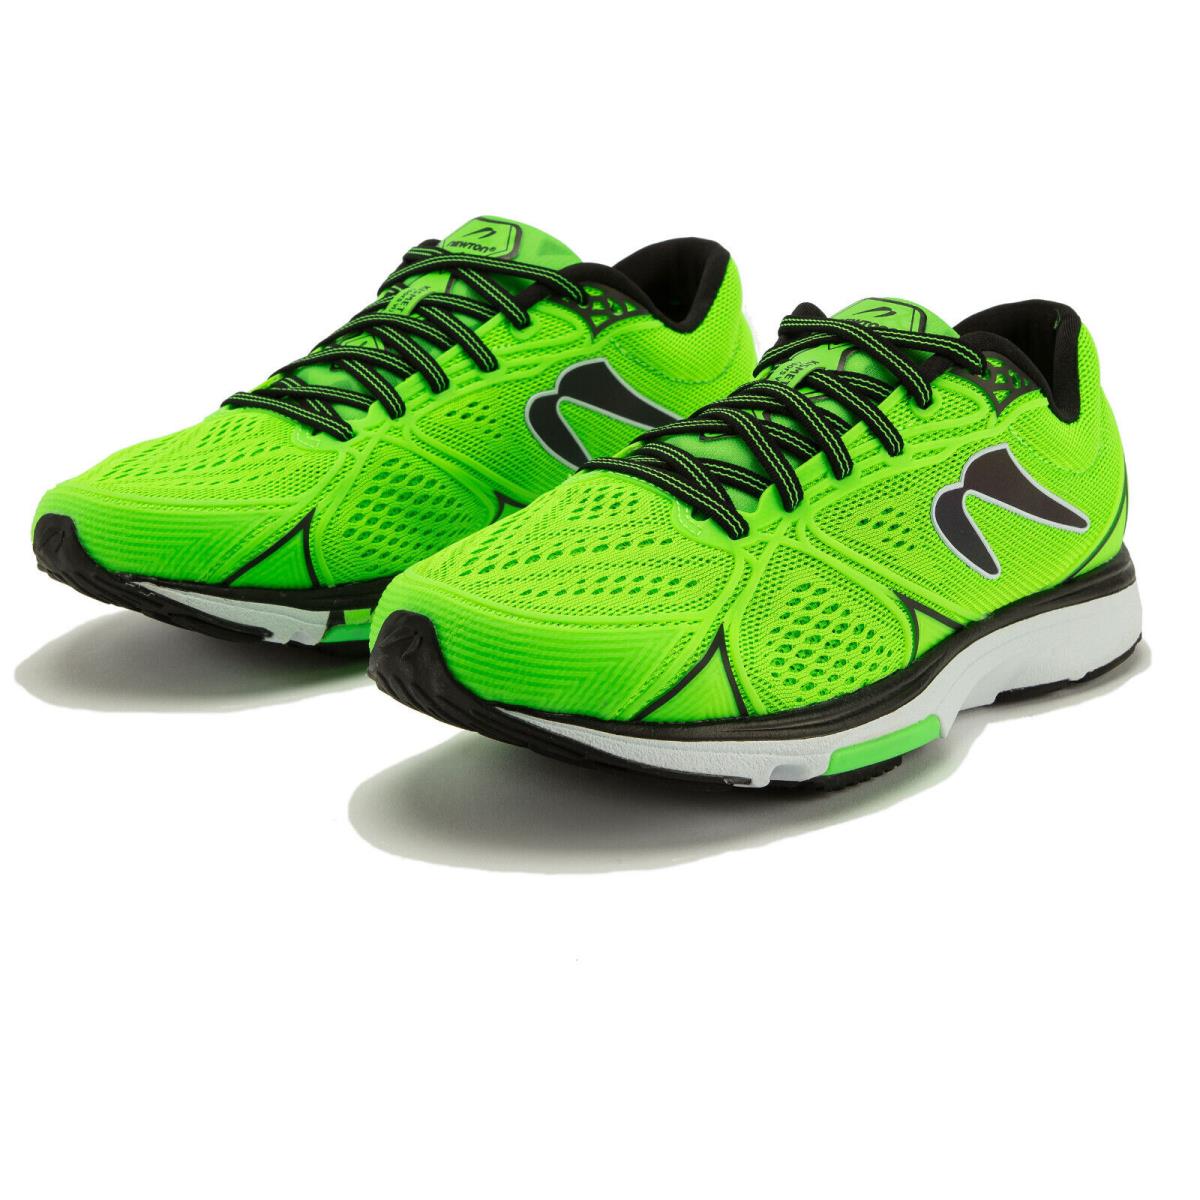 Newton Mens Kismet 6 Running Shoes Trainers Sneakers Green Sports Breathable 